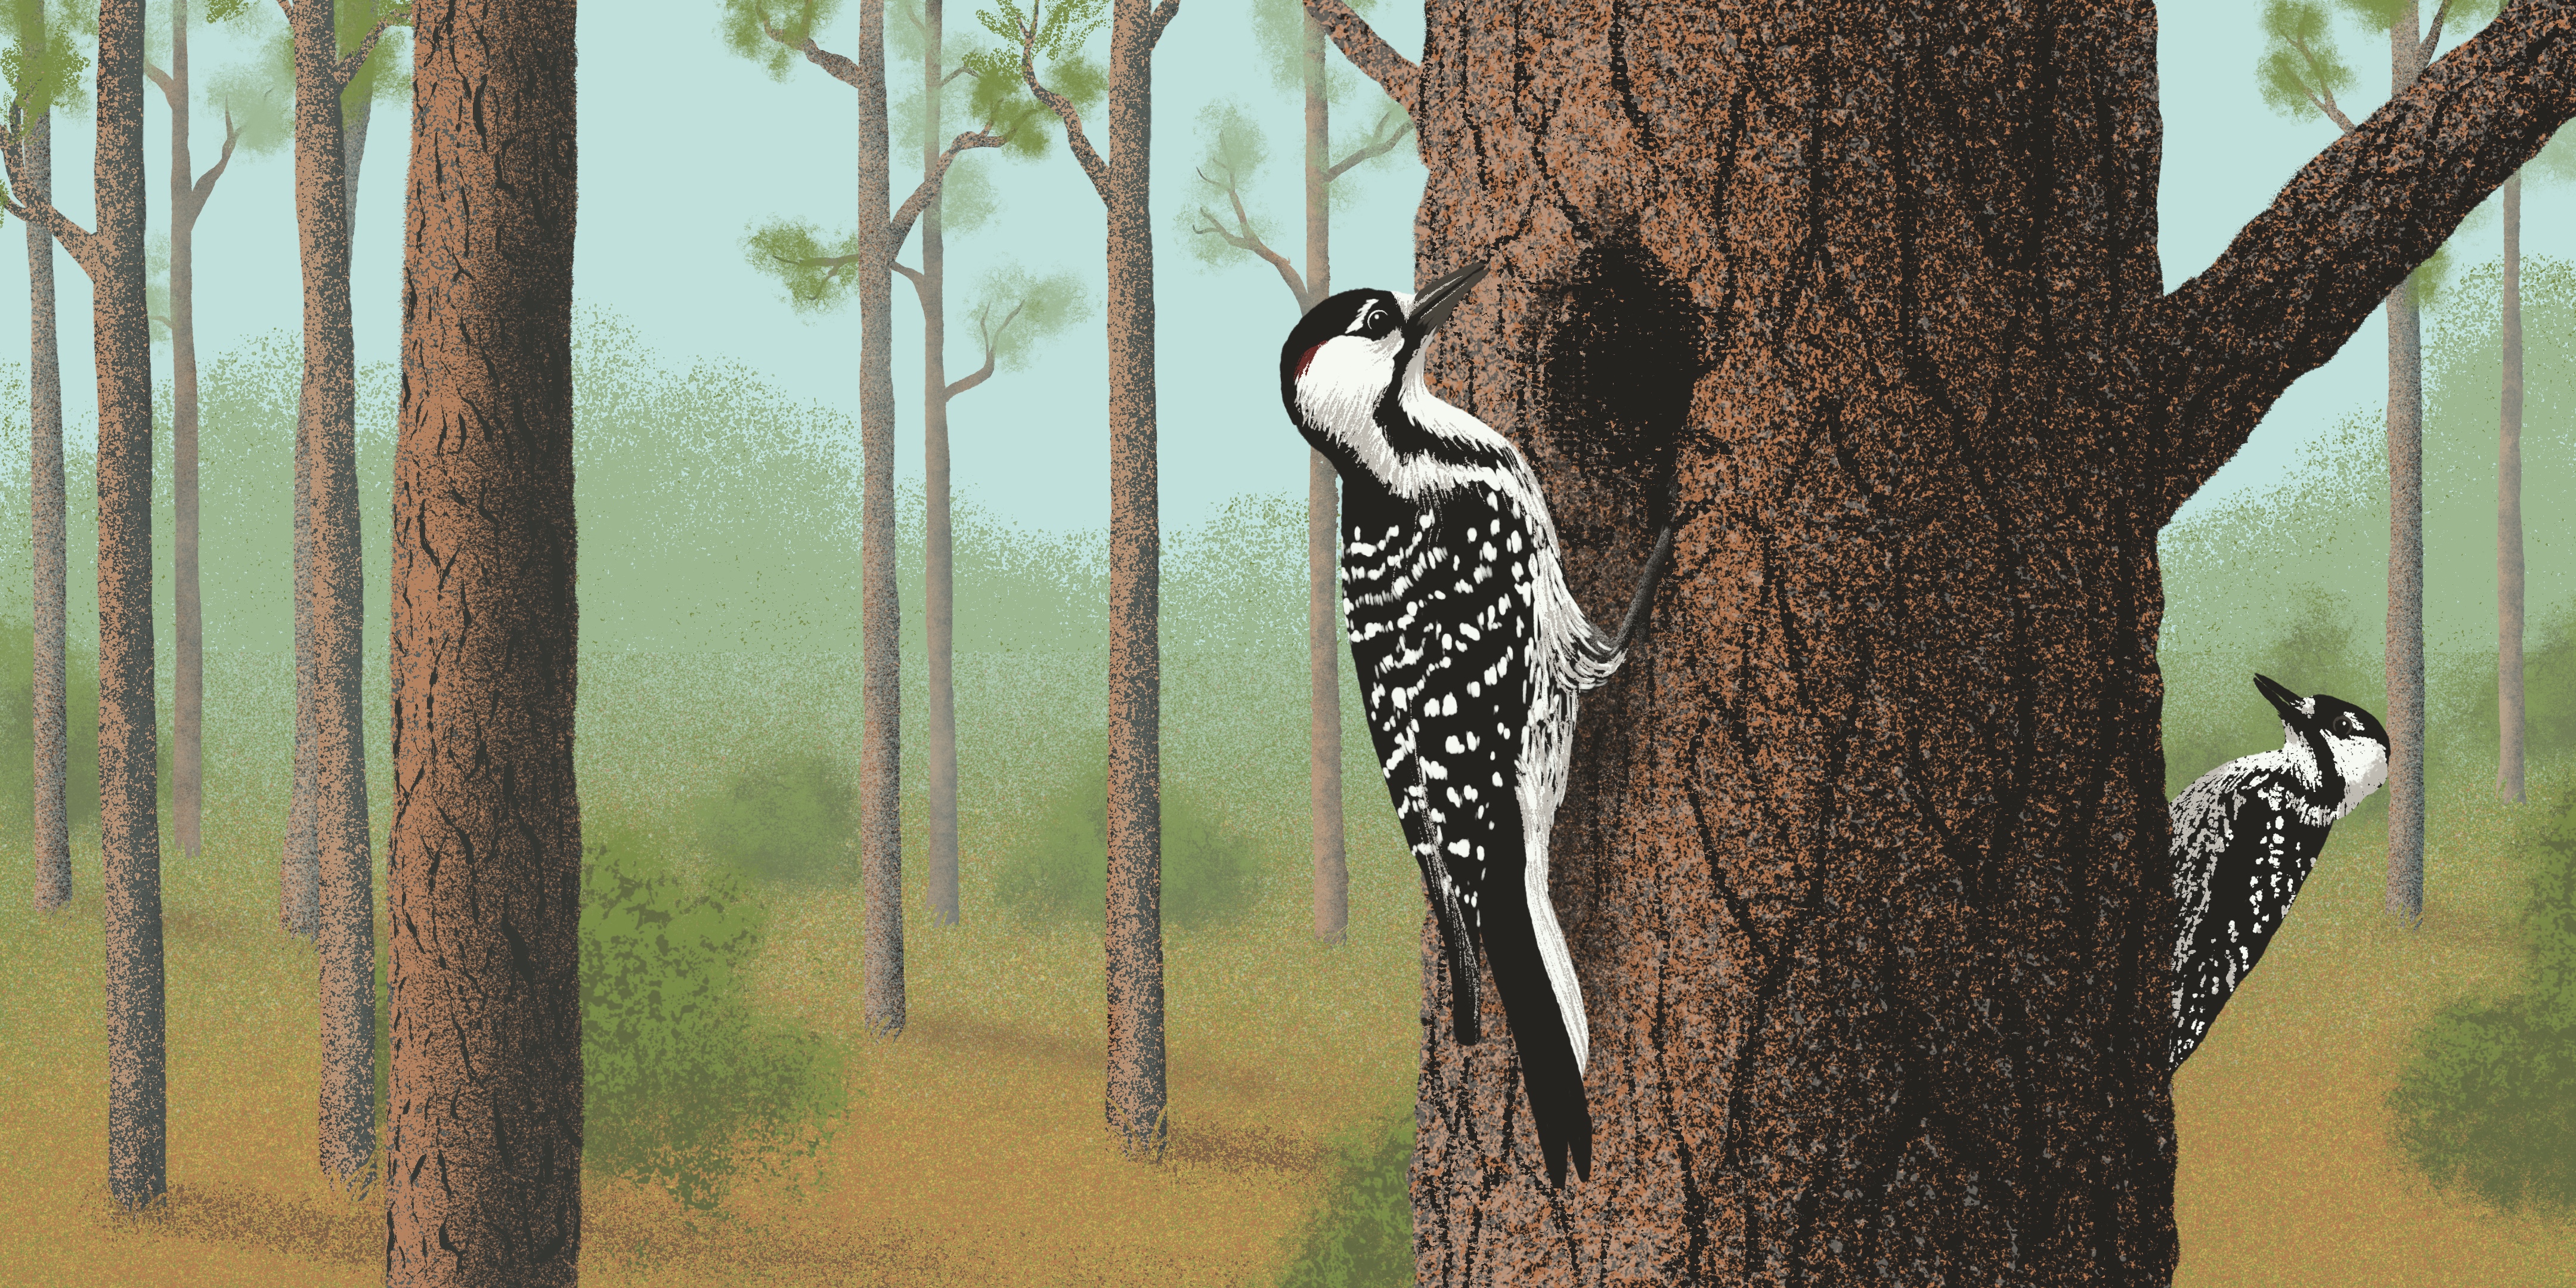 Threatened season 2 episode 2 artwork: Two Red-cockaded Woodpeckers on the trunk of a tree.